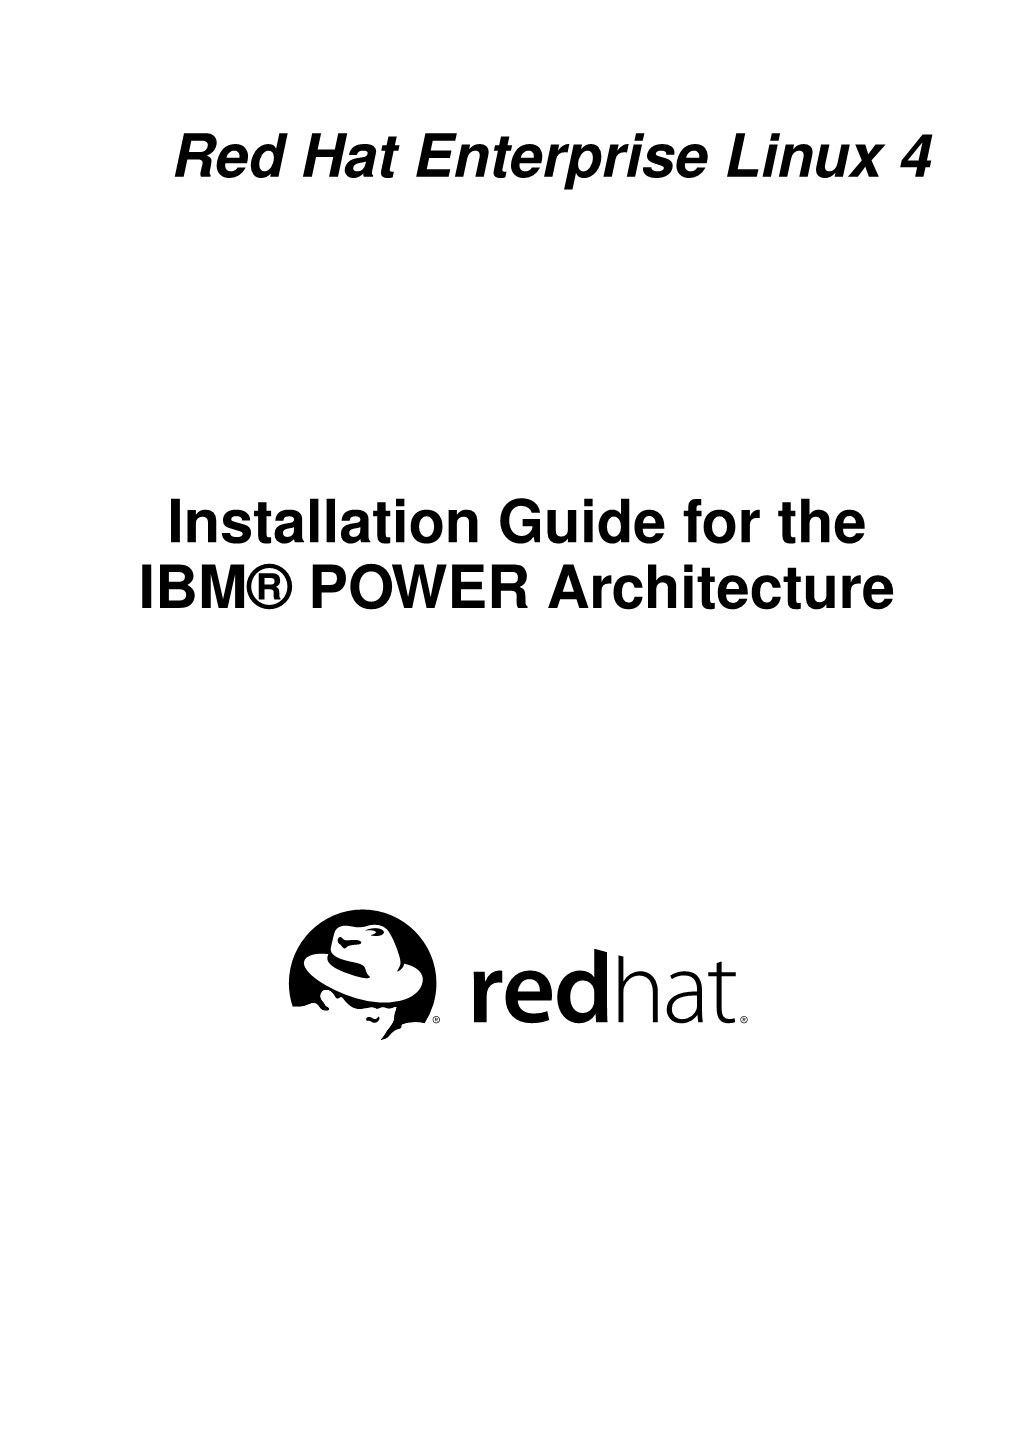 Red Hat Enterprise Linux 4 Installation Guide for the IBM® POWER